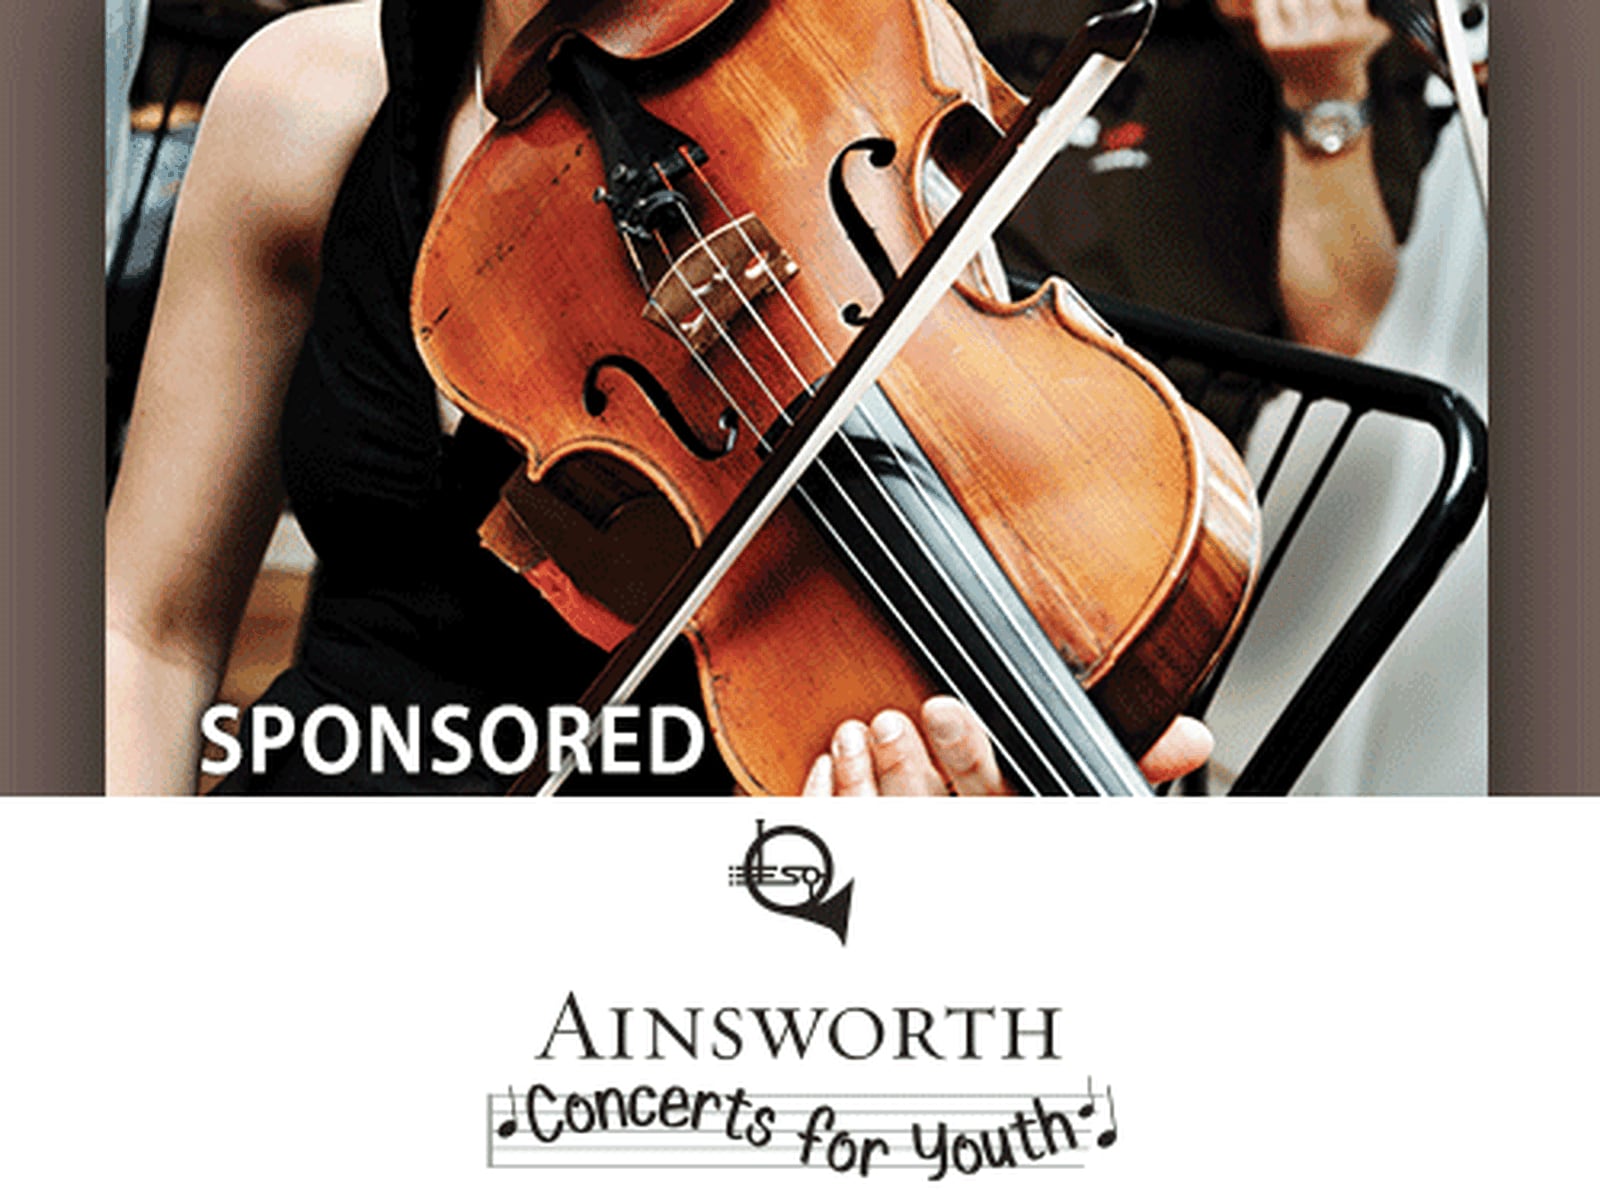 Elgin Symphony Orchestra presents “Ainsworth Concerts for Youth” Shaw